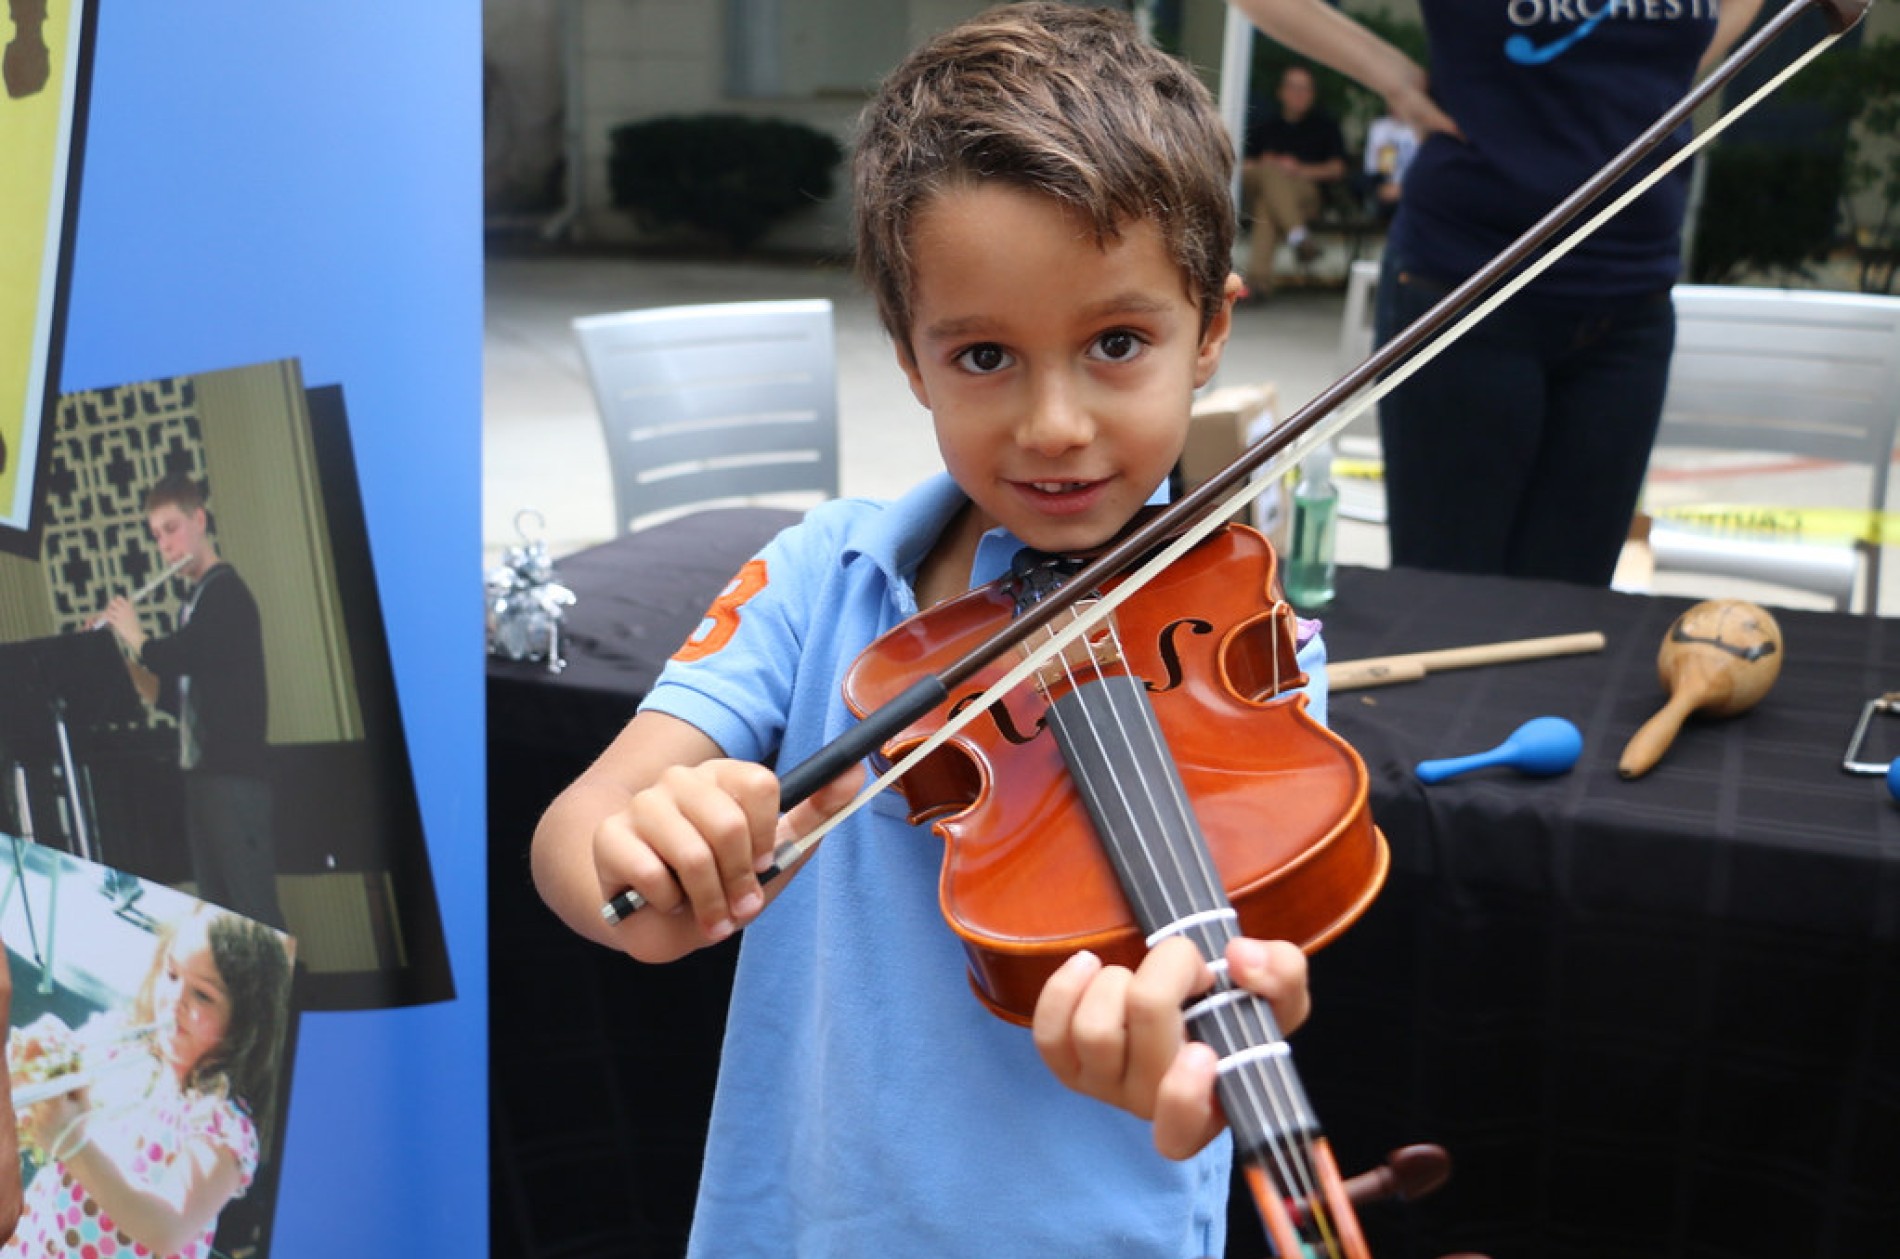 A young boy holding a violin and bow